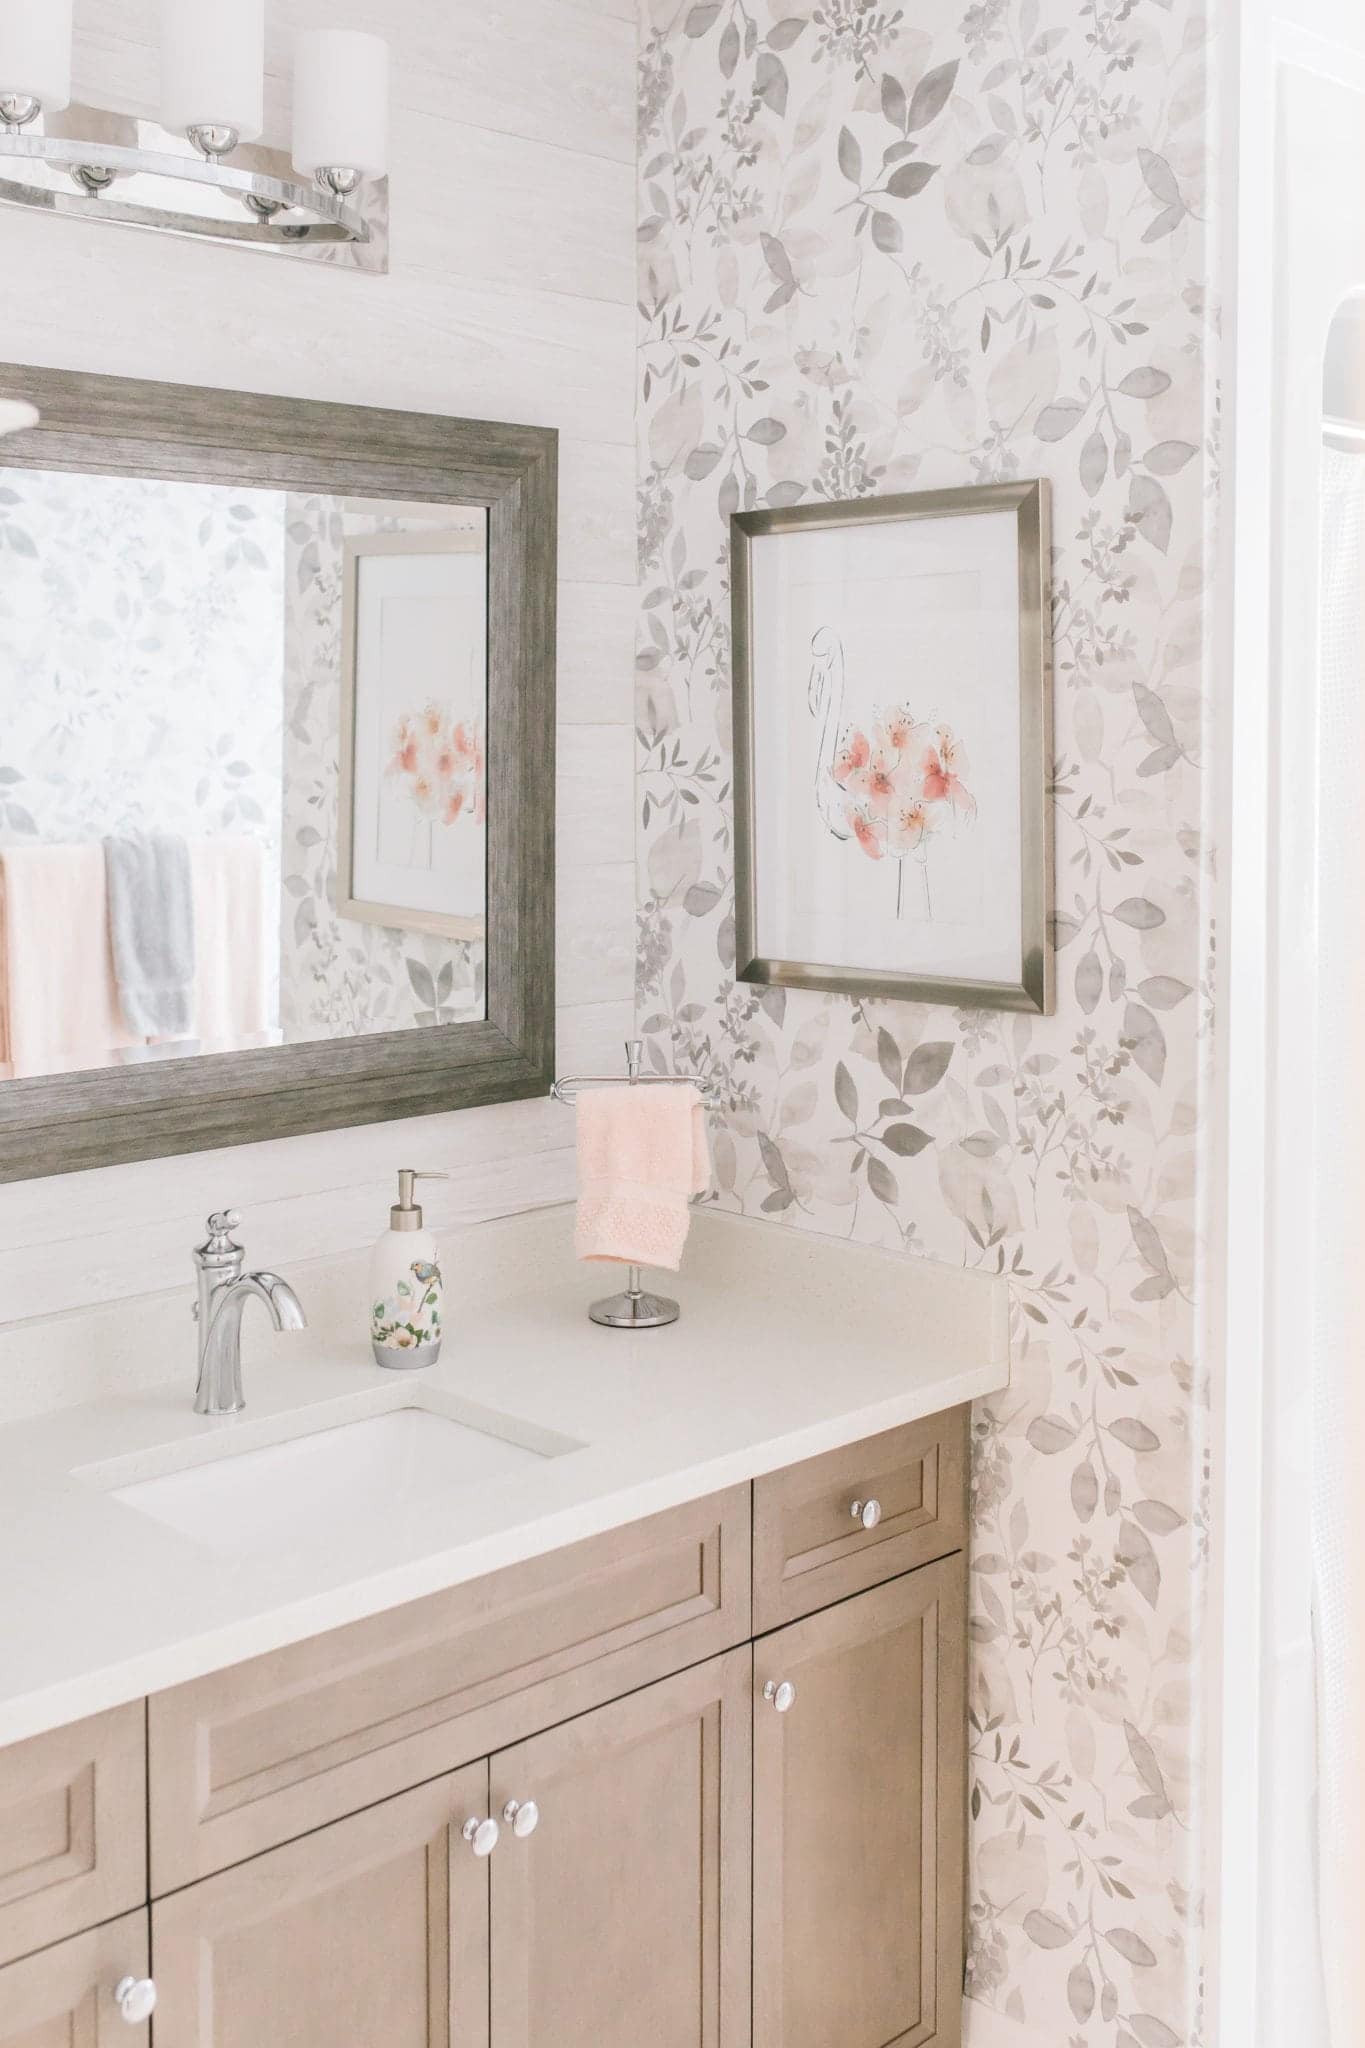 inspirational bathroom renovation using floral wallpaper in beautiful blushes and gray tones